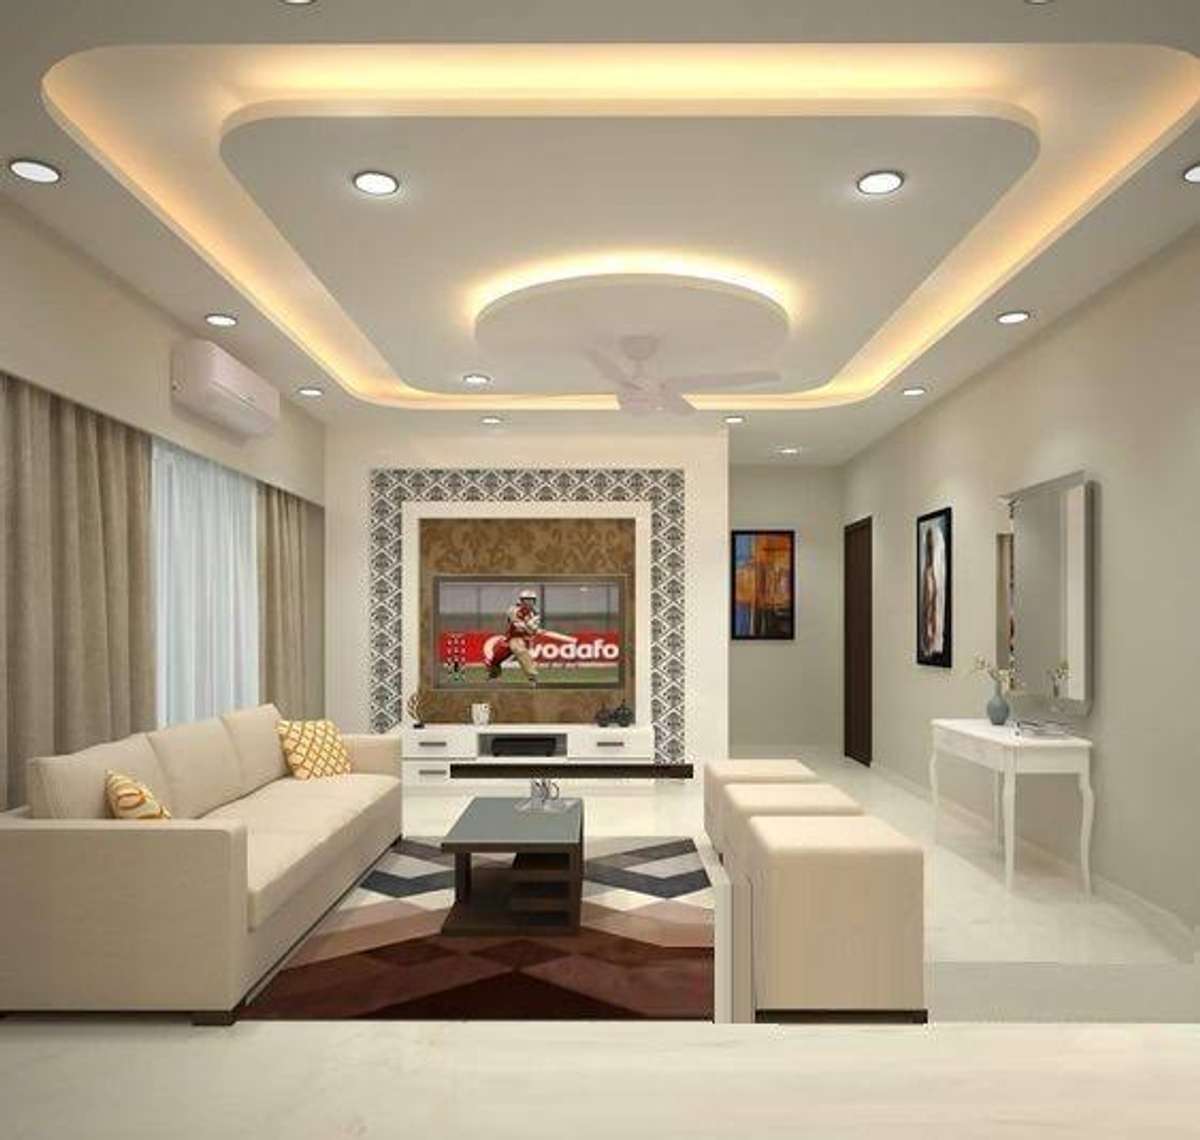 *INTERIOR Design and Decor Consultancy*
Get Your Home a Perfect look as per your choice, Style, Budget and Quality implementation with our expert supervision.